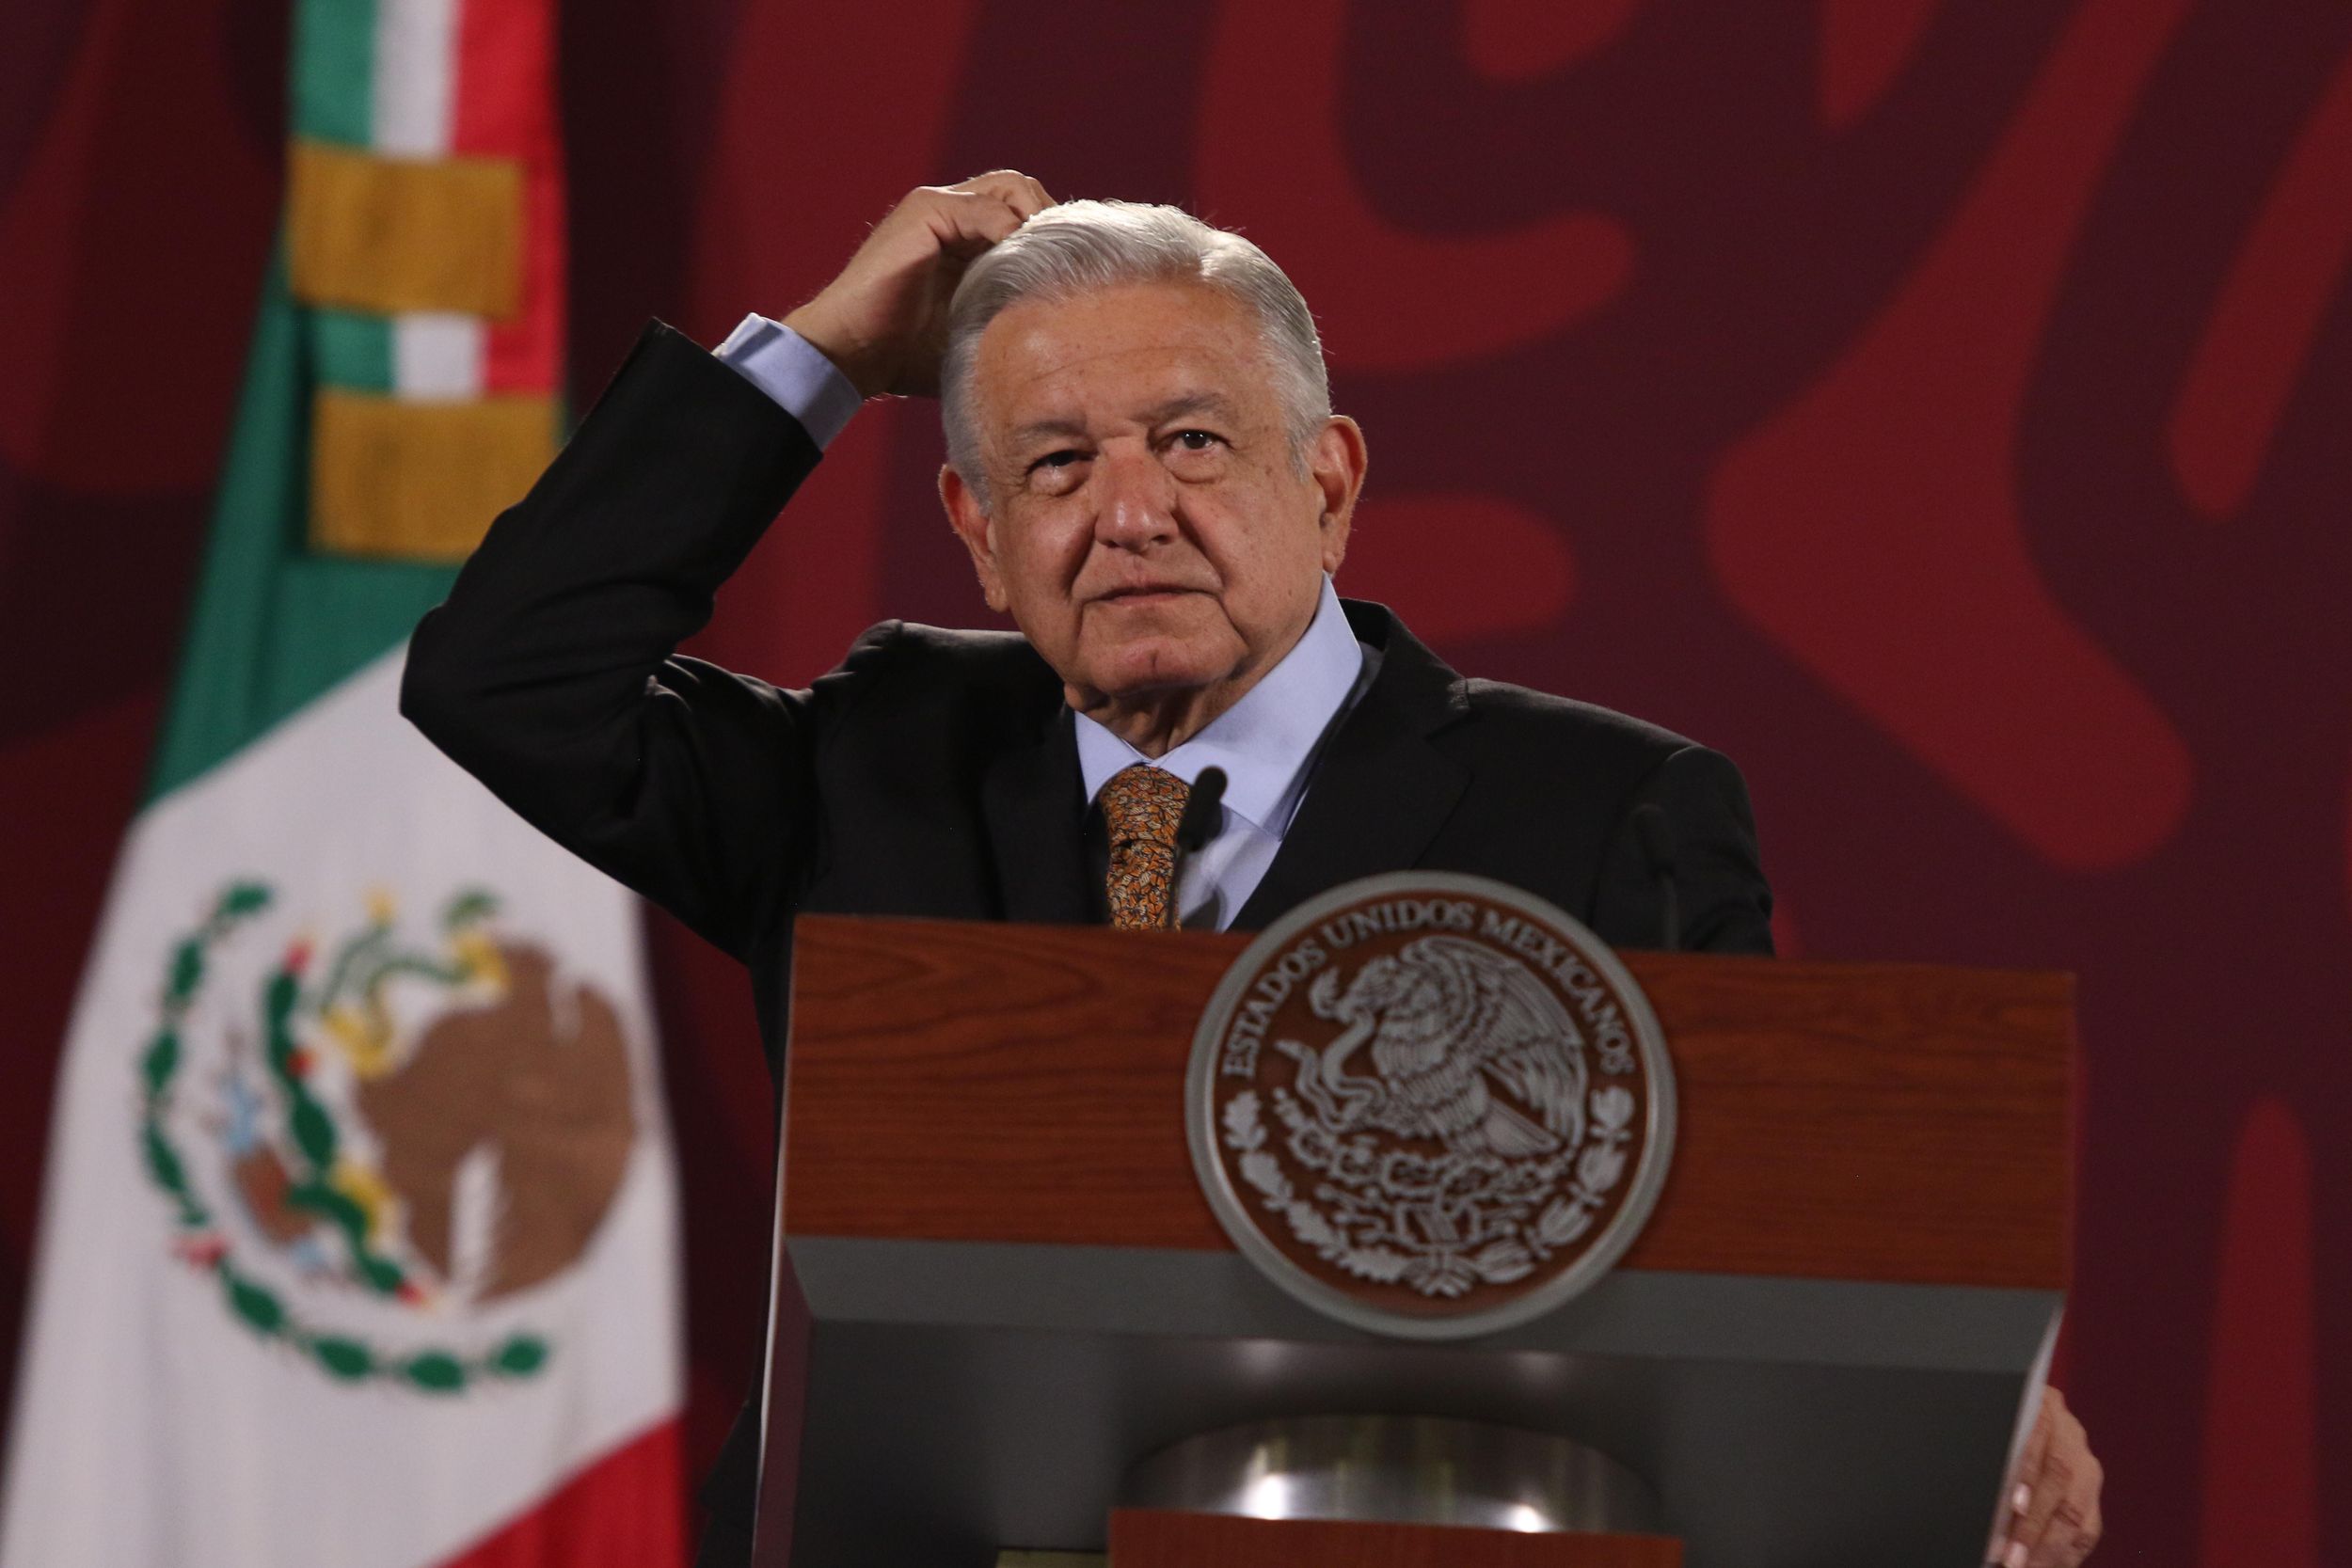 Hard numbers: AMLO wins small in recall, Jakarta students protest, Ukrainians dodge the draft, we learn to do nothing